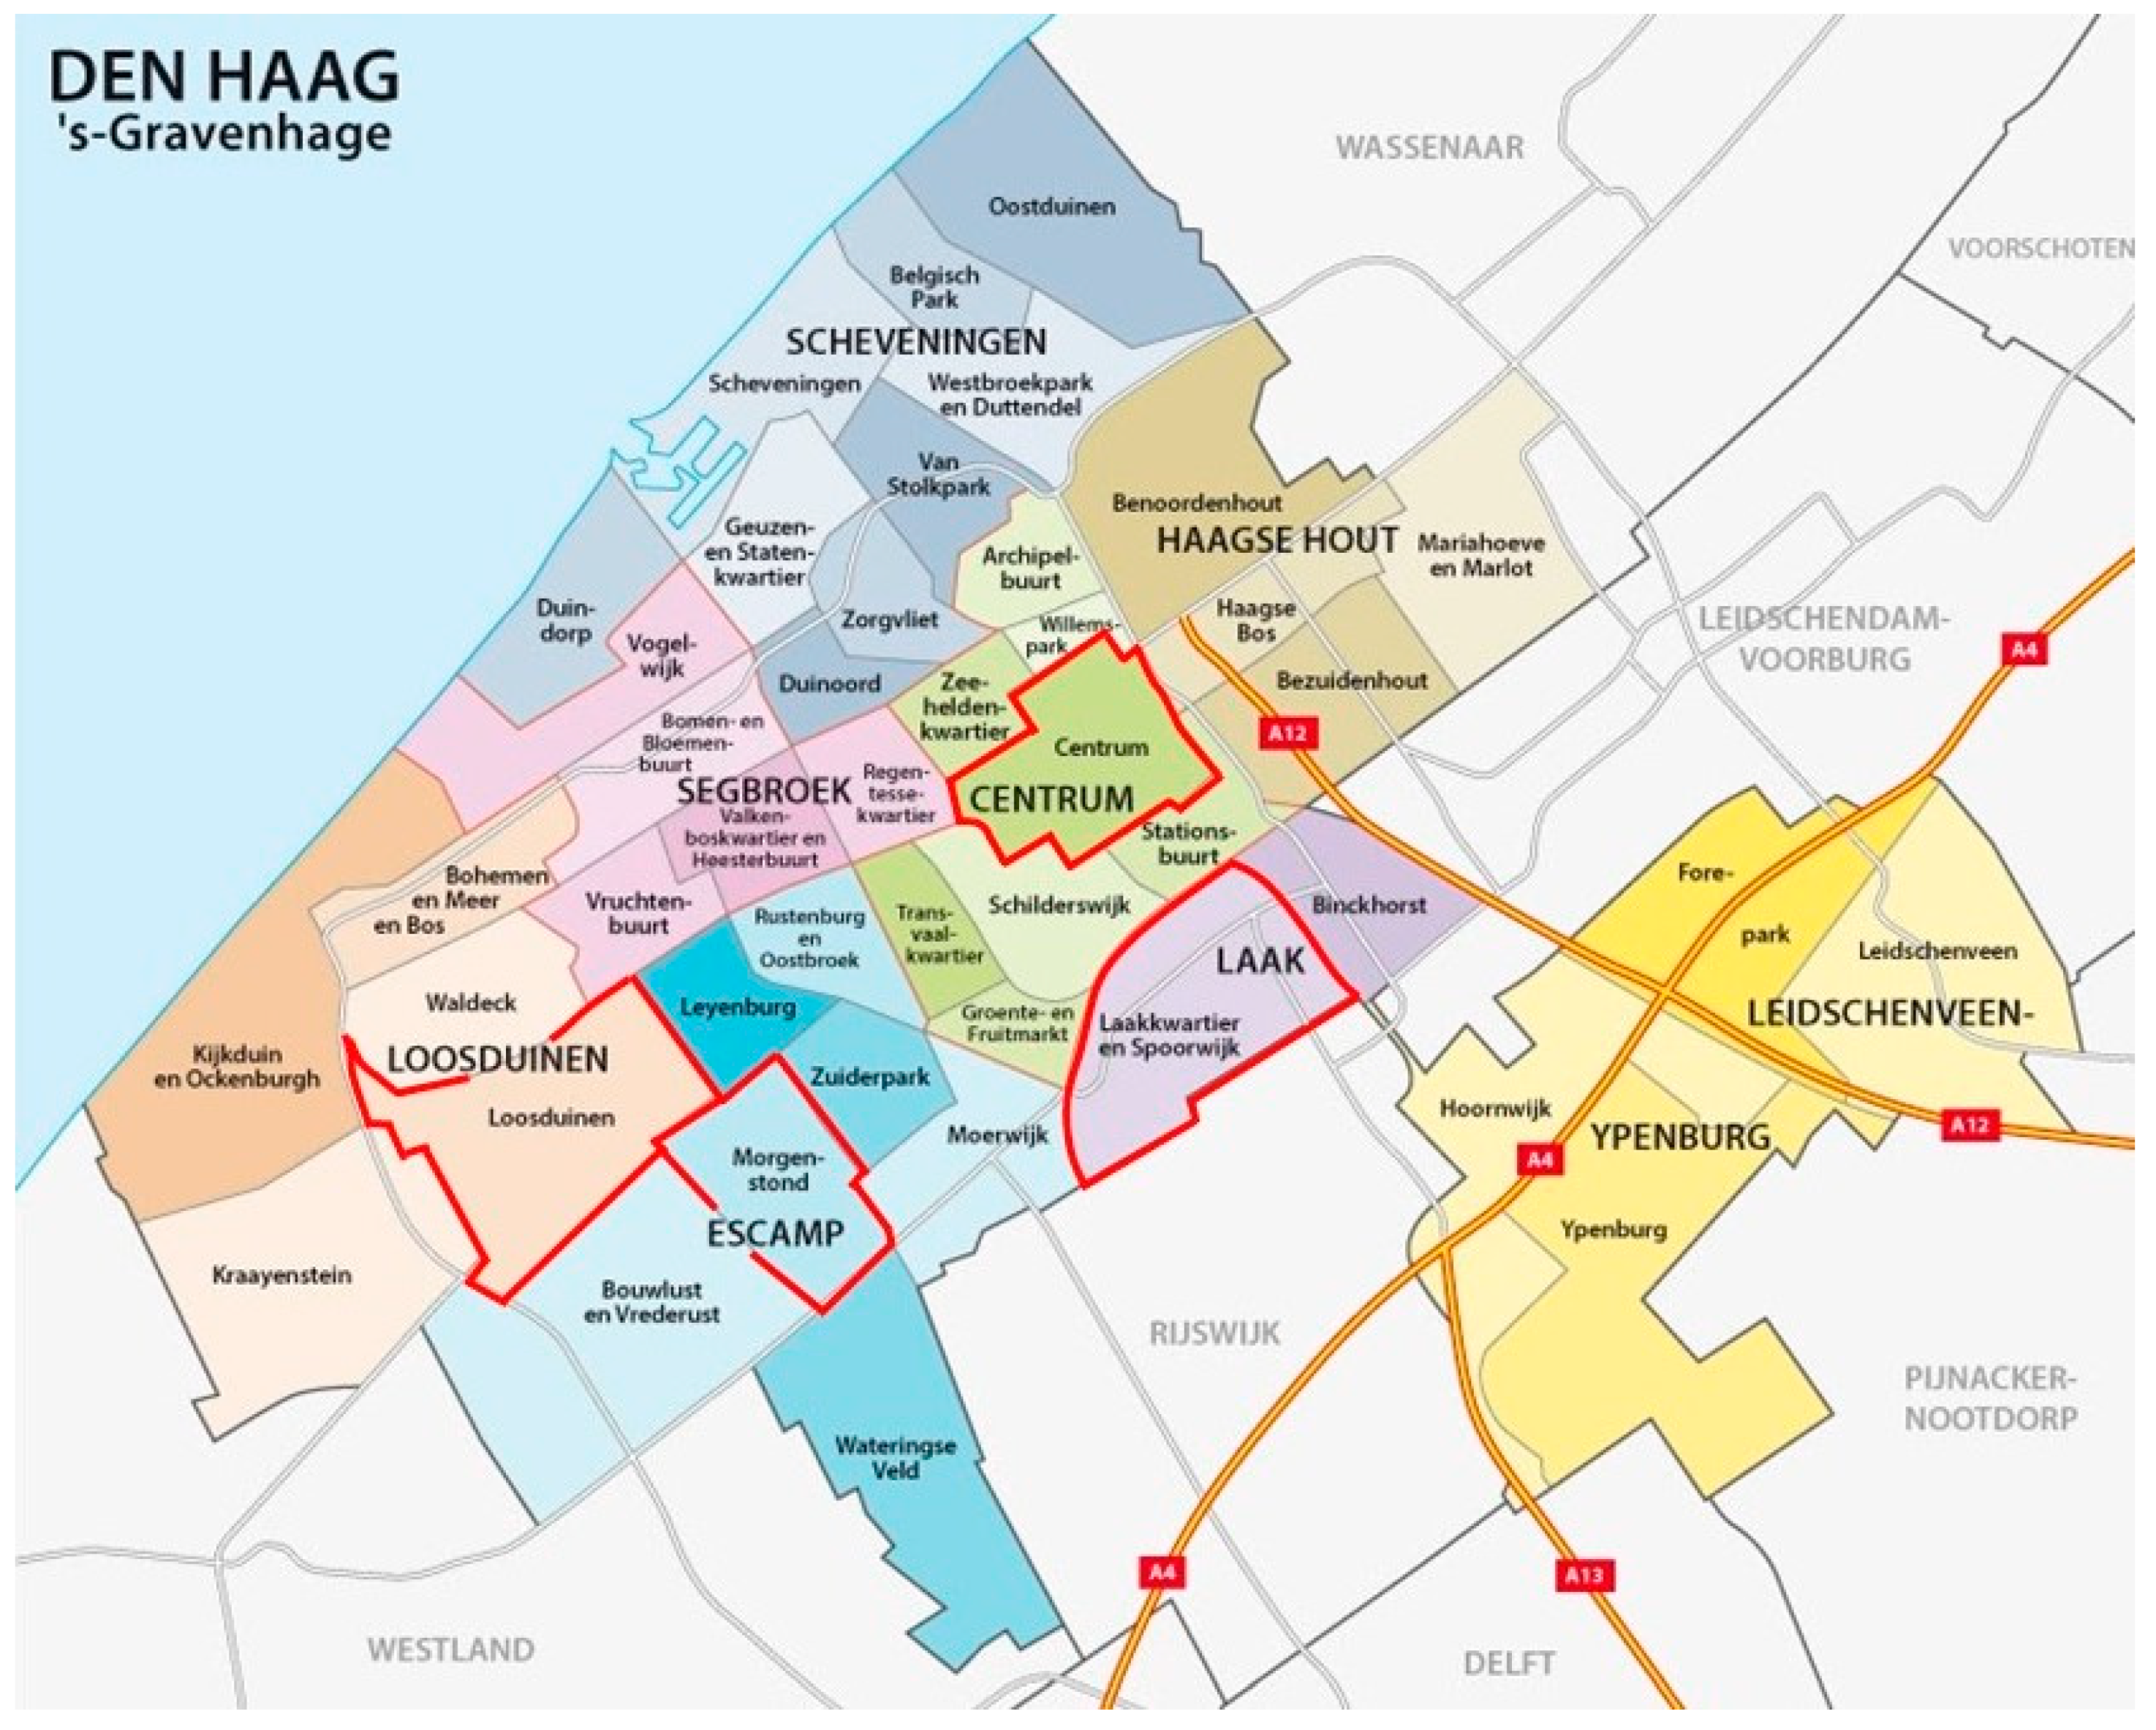 IJERPH | Free Full-Text | Towards a Better Understanding of the Sense of  Safety and Security of Community-Dwelling Older Adults. The Case of the  Age-Friendly City of The Hague | HTML